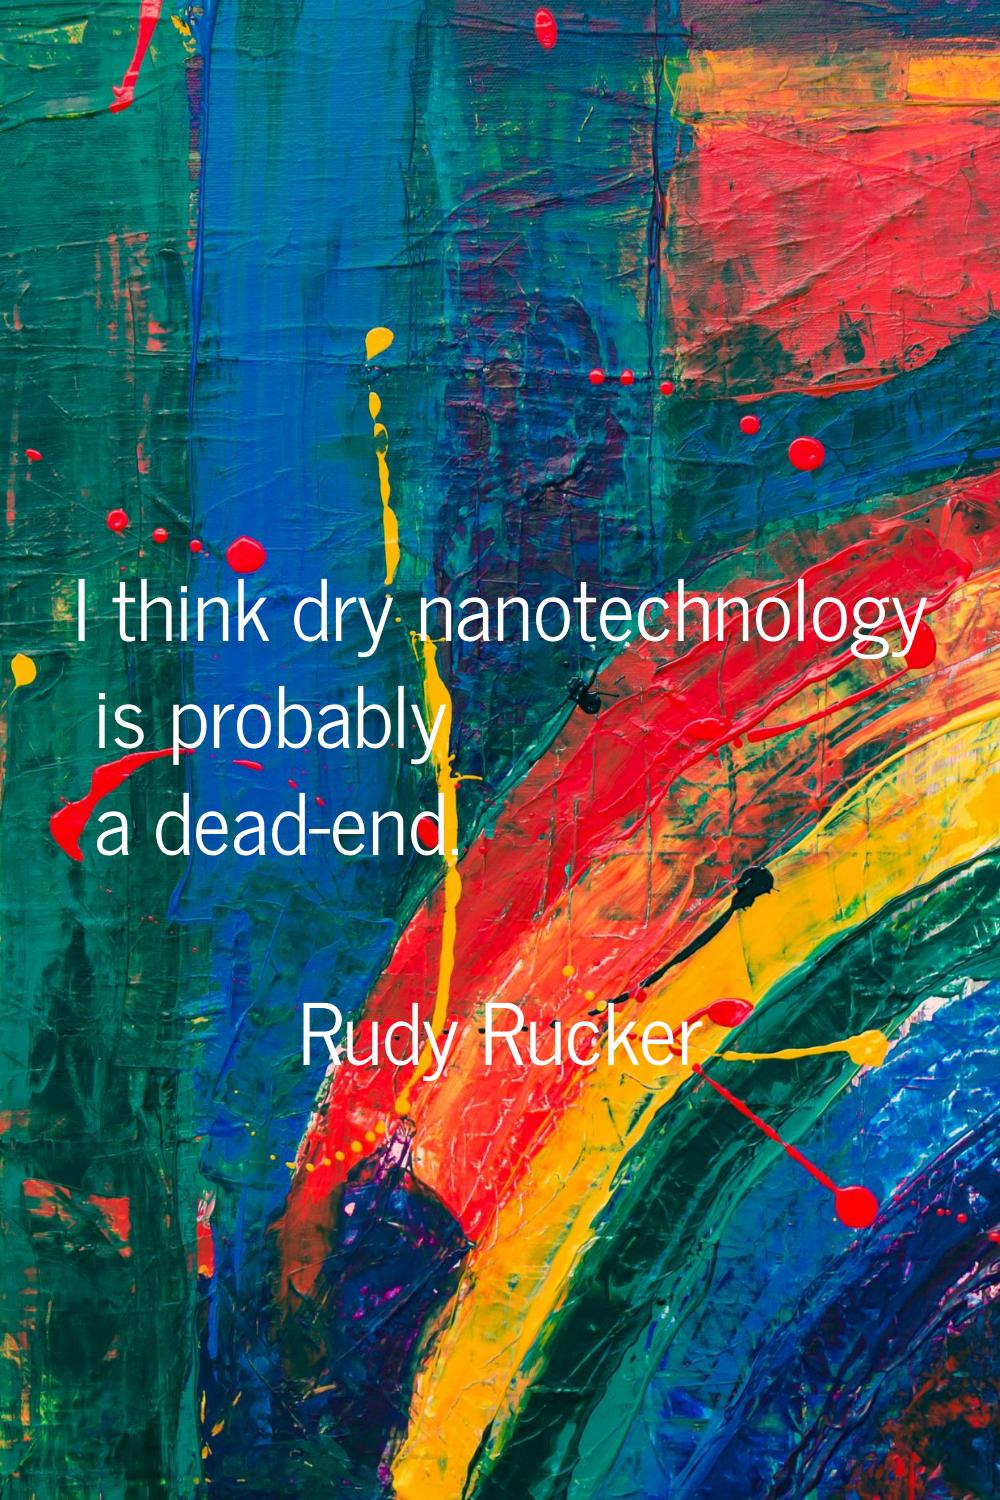 I think dry nanotechnology is probably a dead-end.